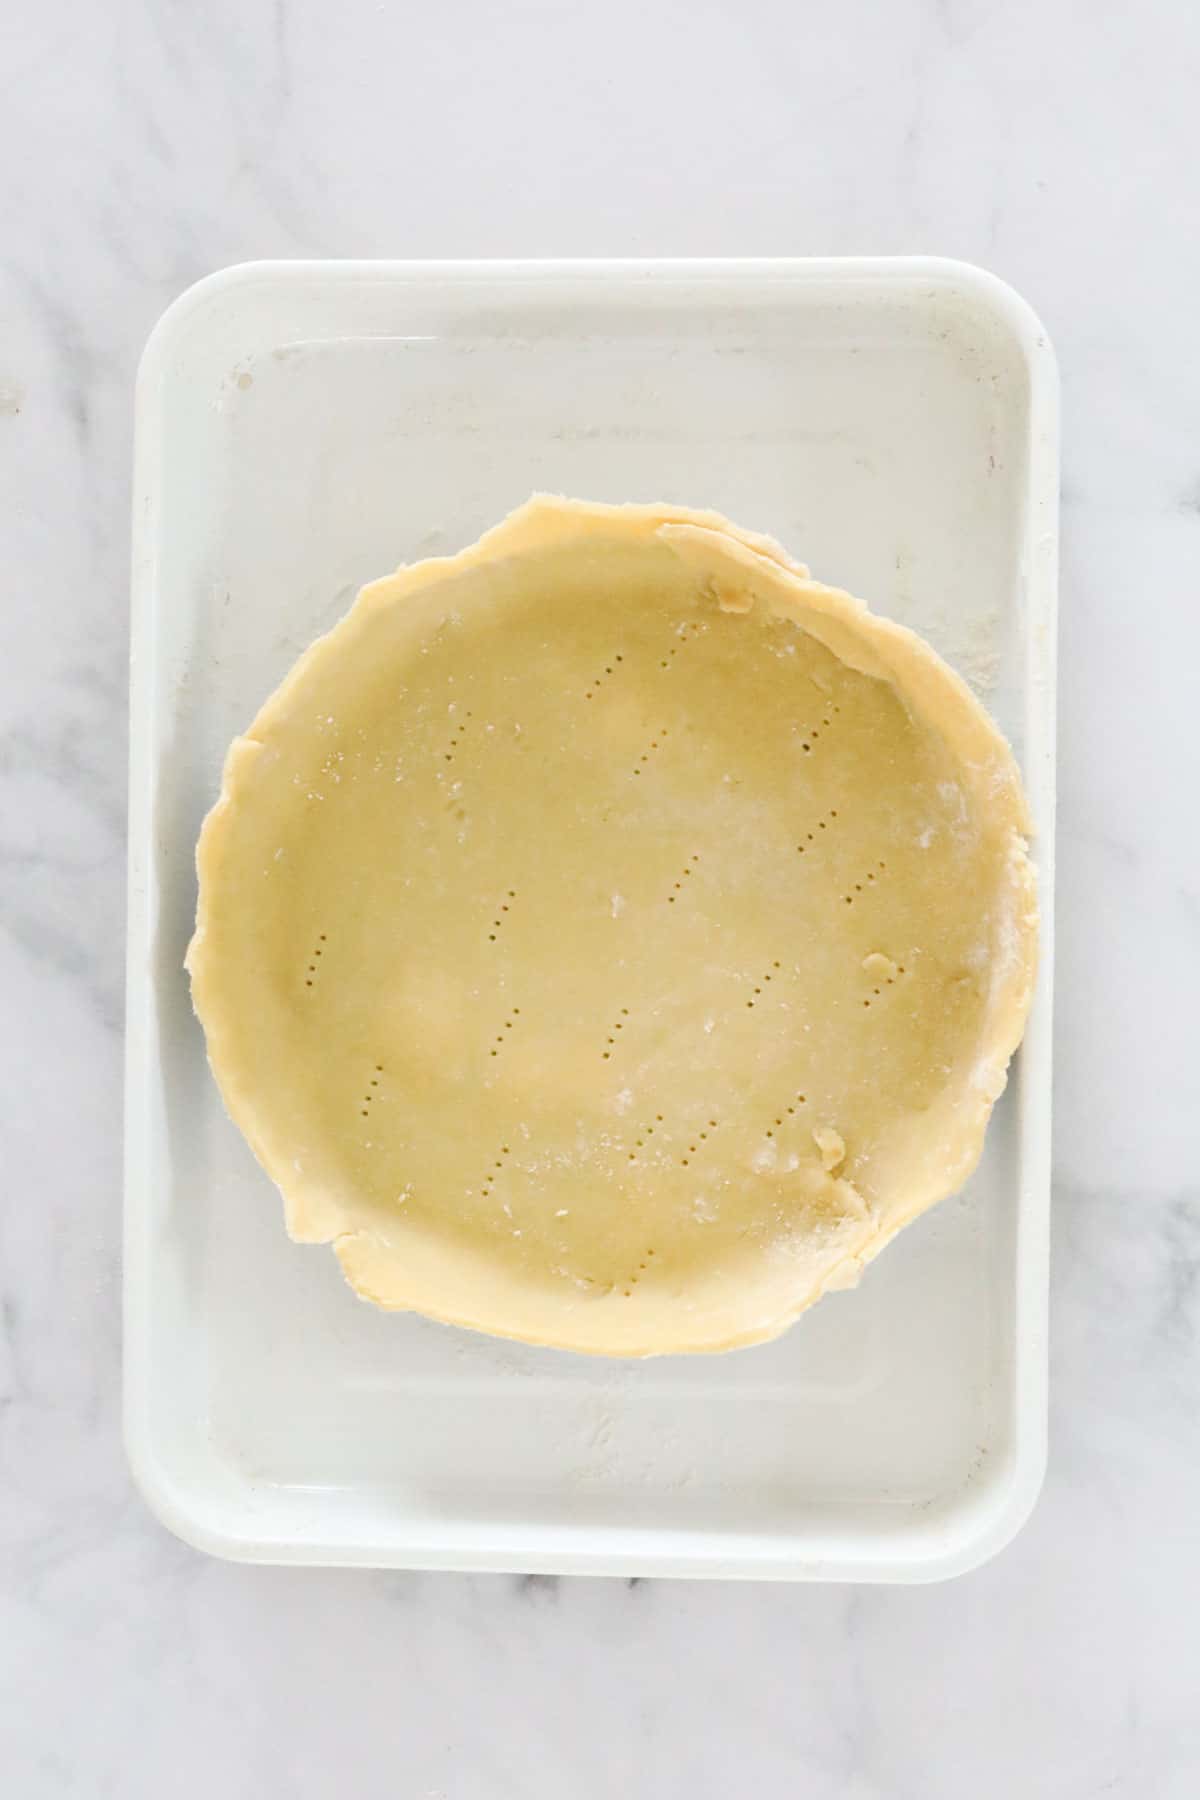 Uncooked pastry in a round pie dish